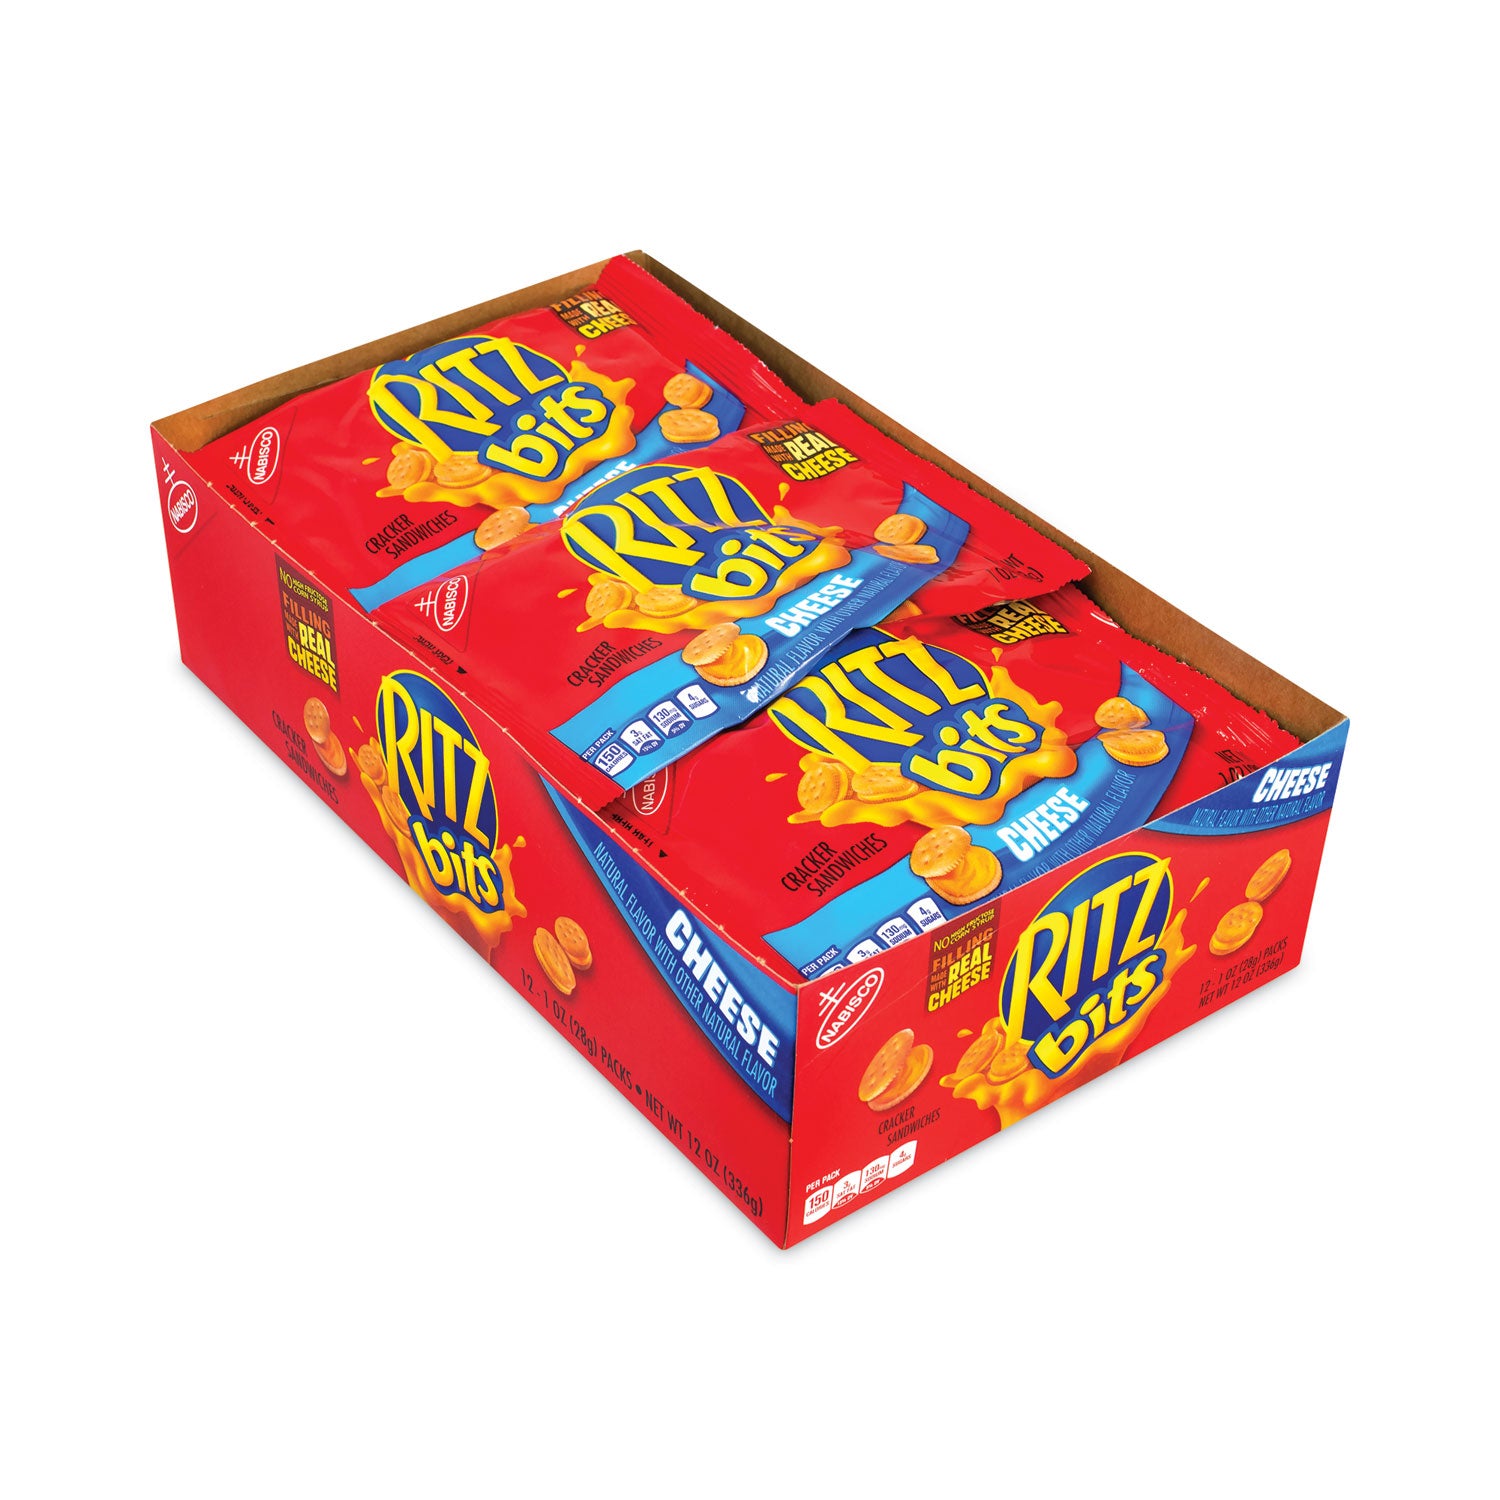 ritz-bits-cheese-sandwich-crackers-1-oz-pouch-48-pouches-carton-ships-in-1-3-business-days_grr30400071 - 1